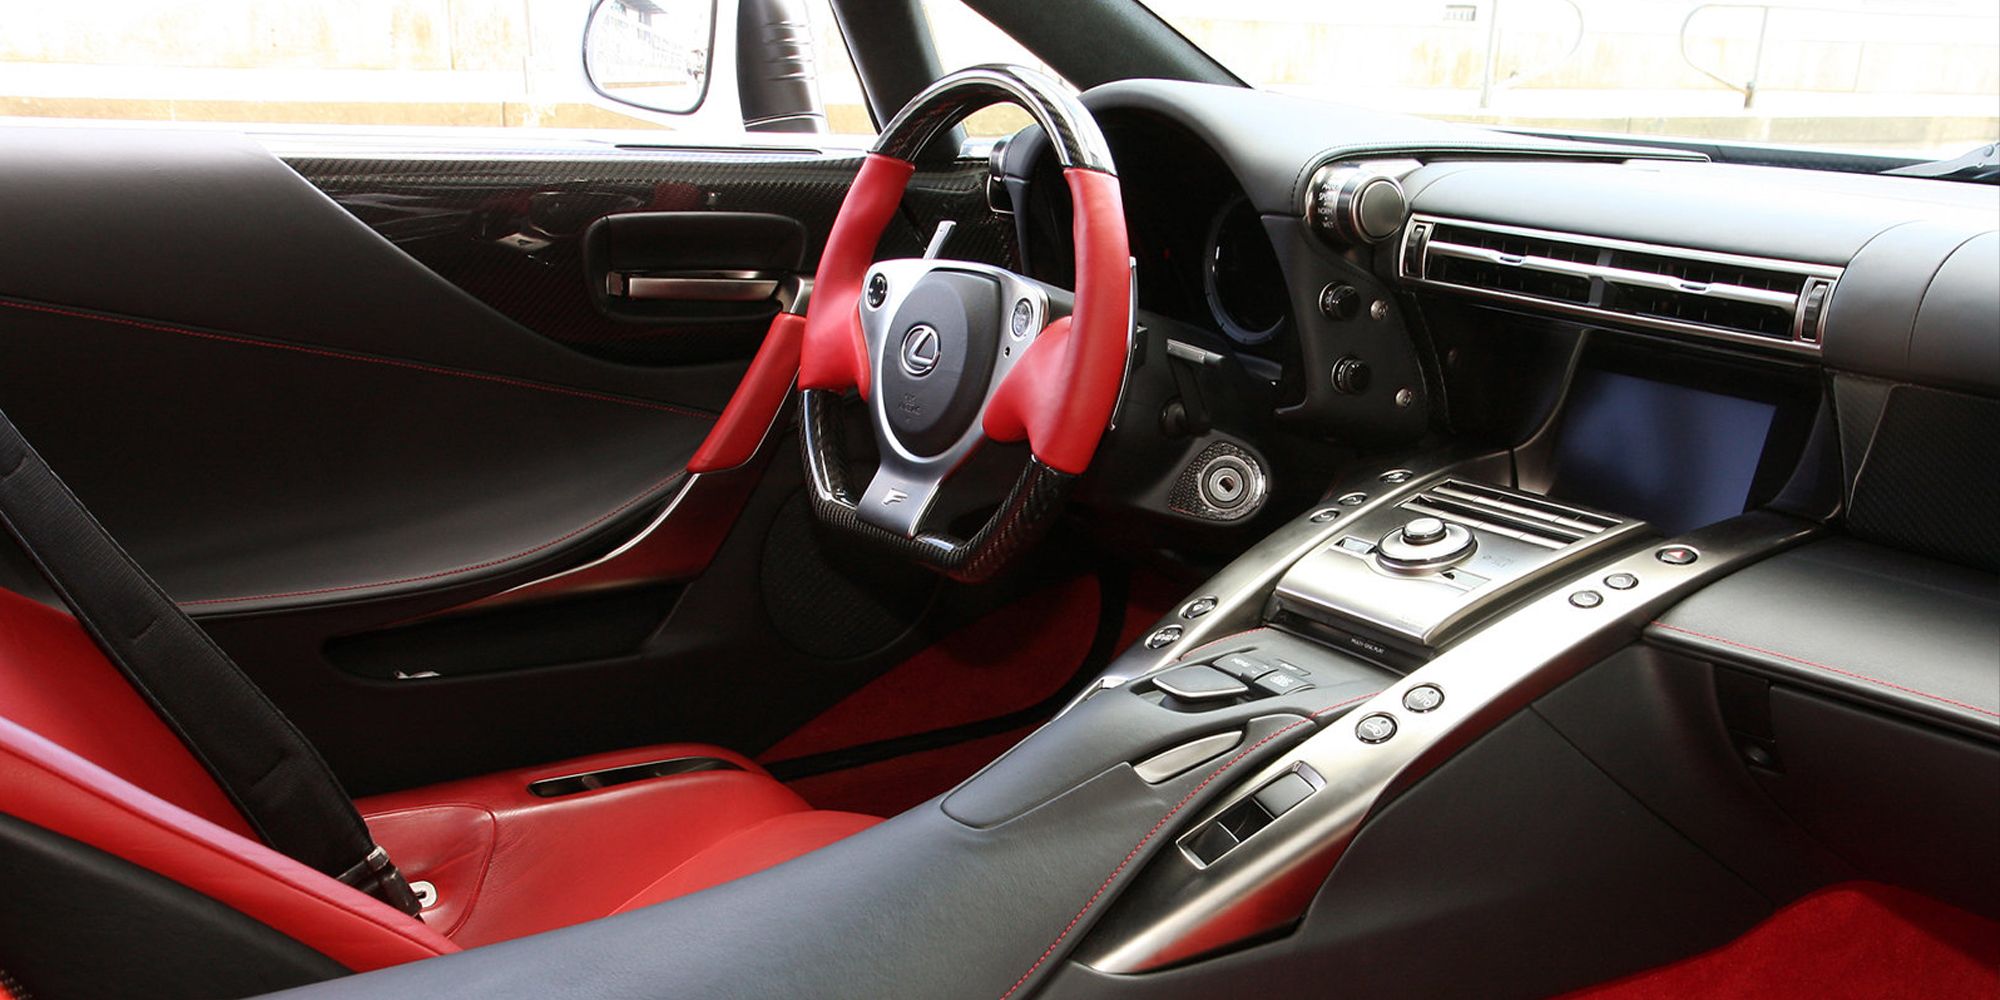 The interior of the LFA, black and red leather, LHD